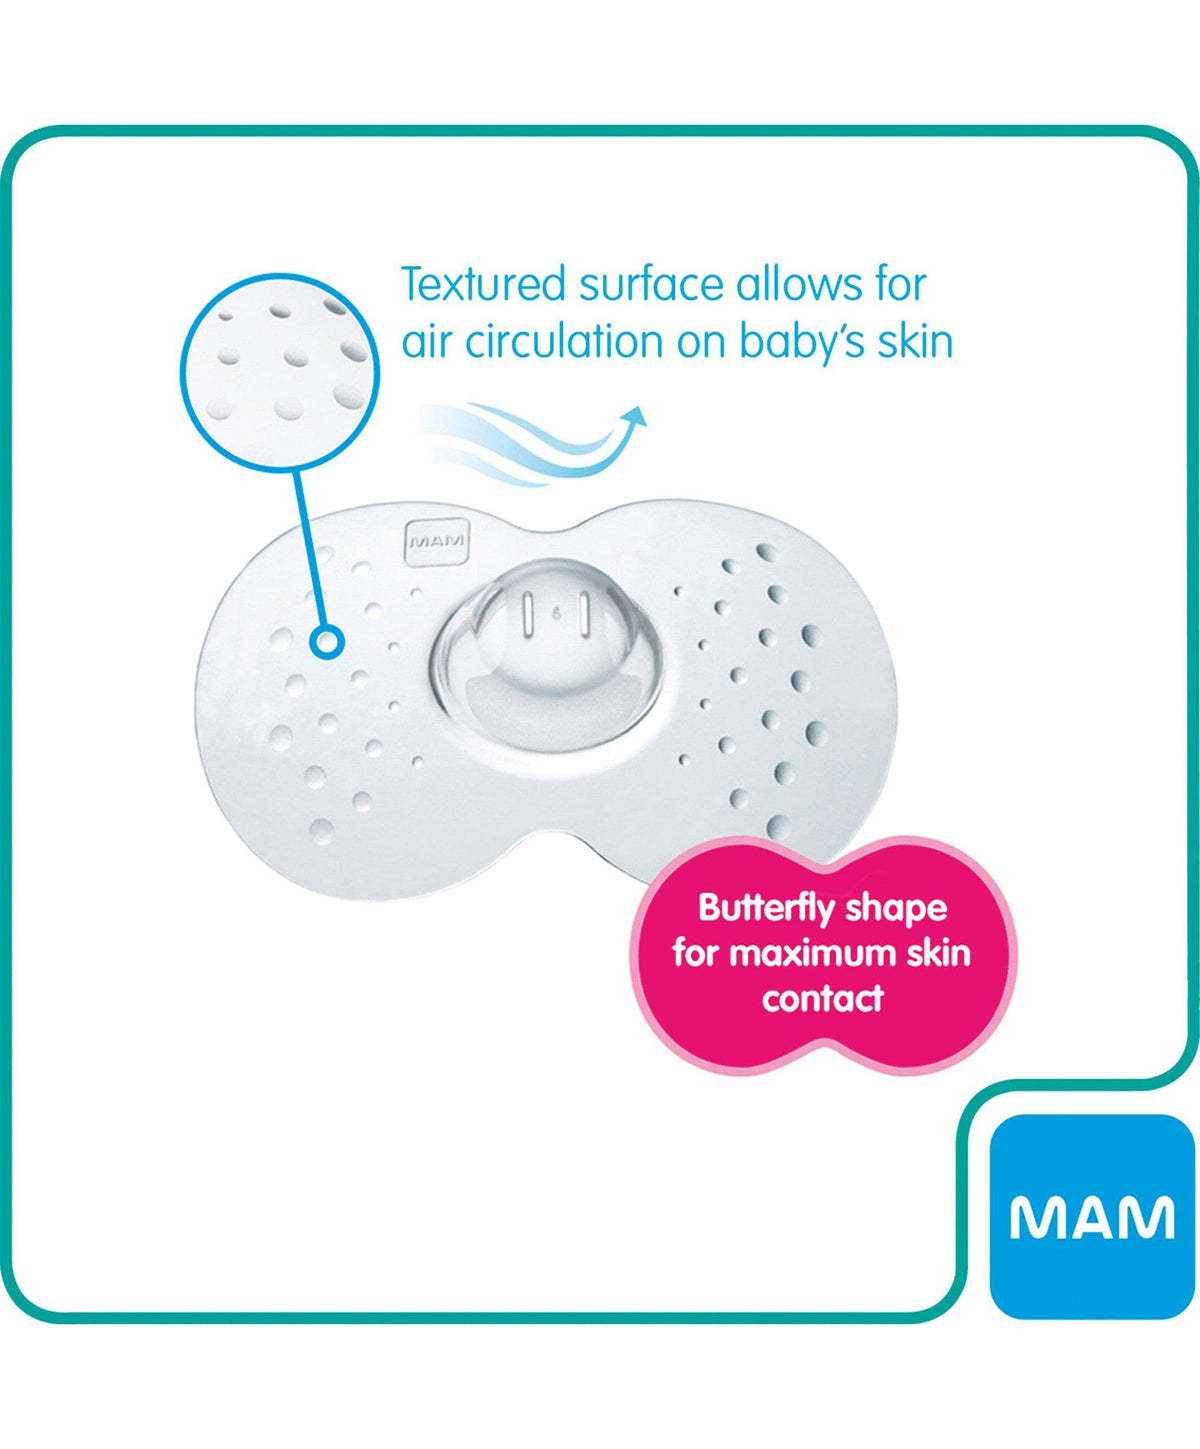 Chicco Nipple Shields M/L 2pcs - Mother & Baby from Pharmeden UK